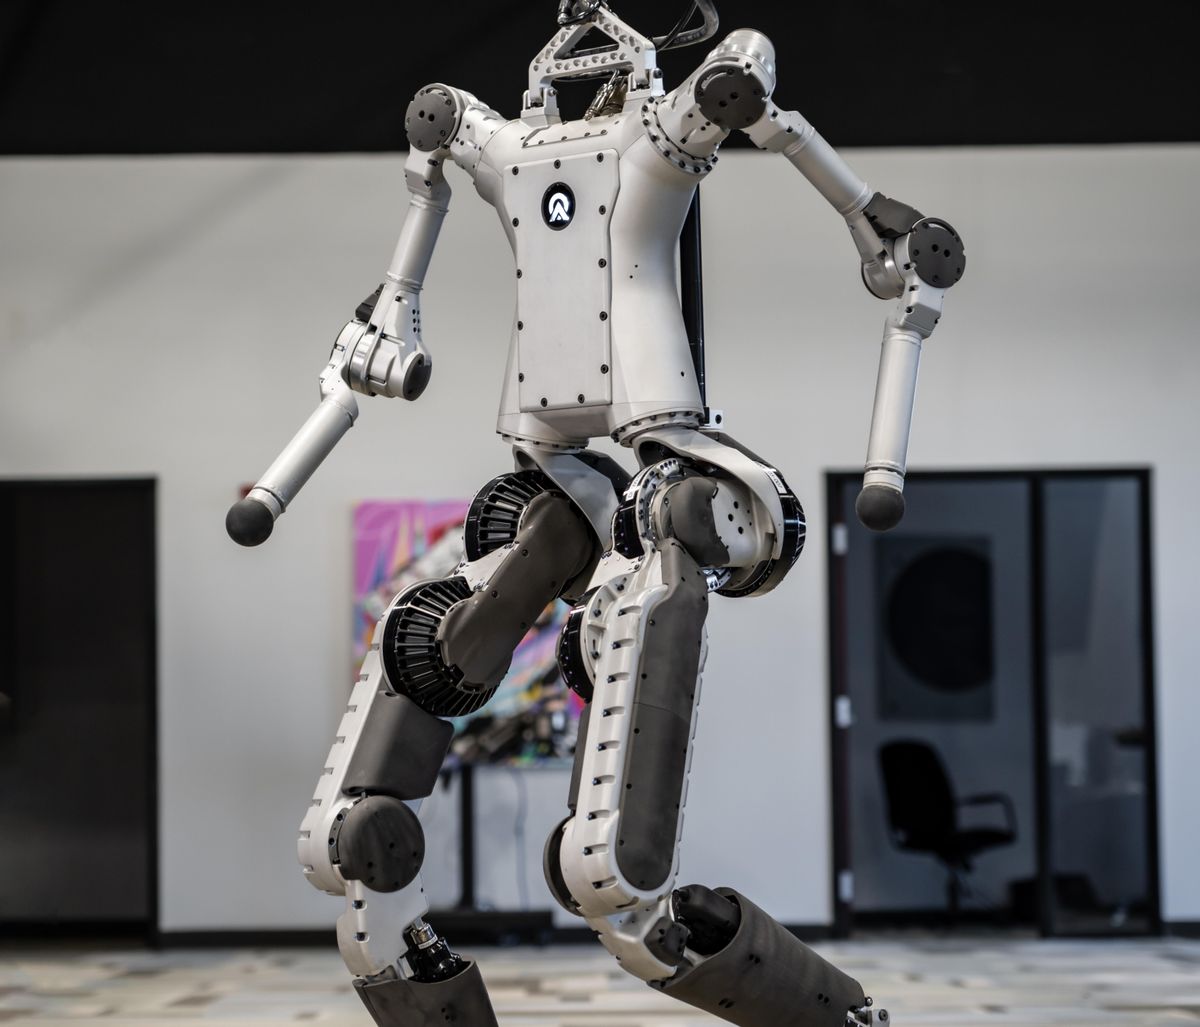 A photo of a sliver and black humanoid robot